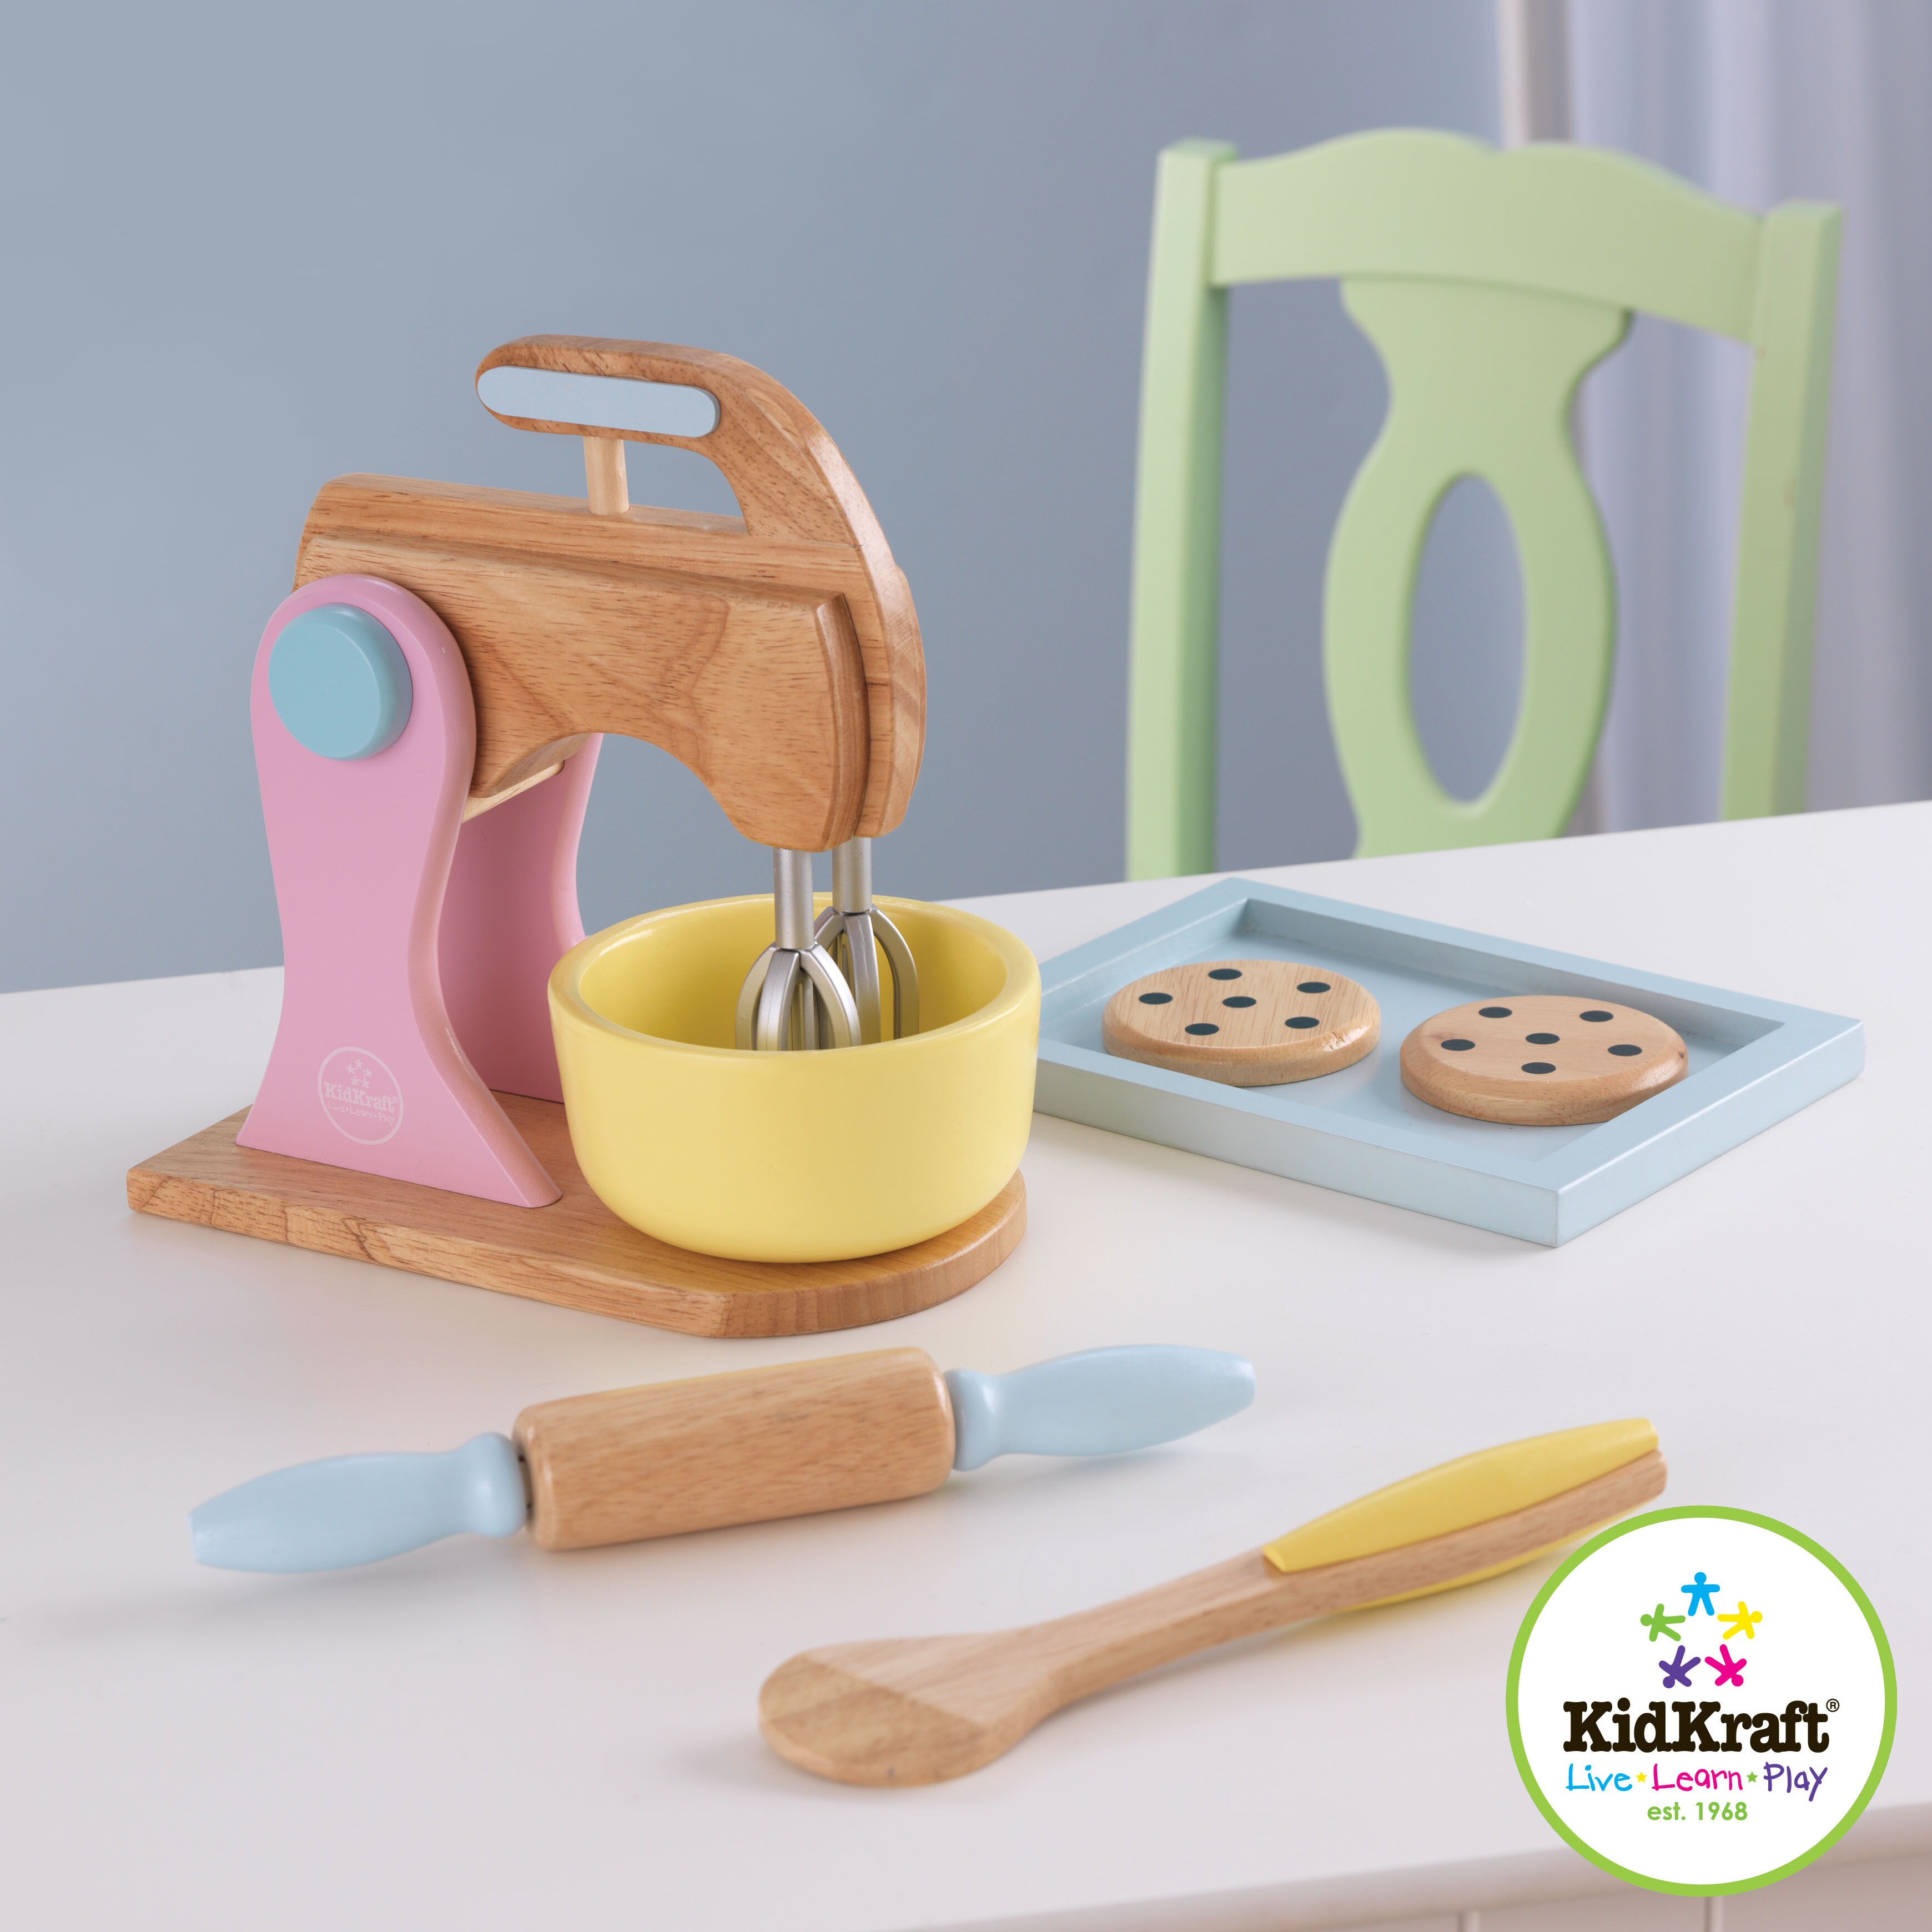  Wooden Toy Bake-Cookie Mixer Set(14 pcs)- play kitchen  accessories Interactive Early Learning Toy, Exclusive Egg, Rolling Pin and  Cookie Set - Fun and Colorful for Girls and Boys : Toys 